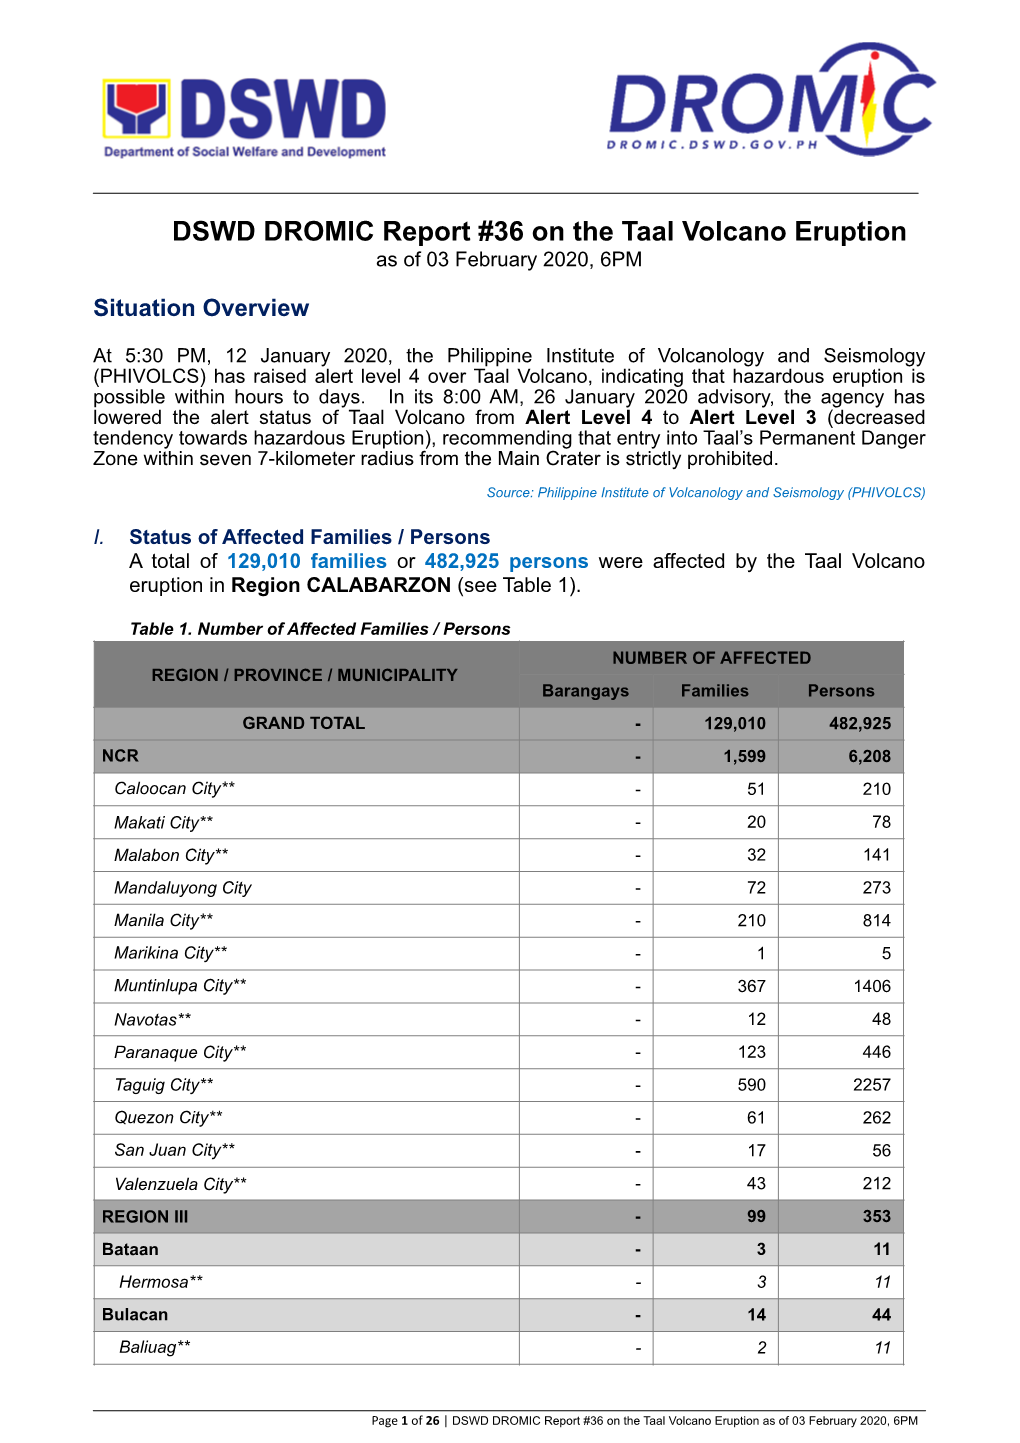 DSWD DROMIC Report #36 on the Taal Volcano Eruption As of 03 February 2020, 6PM